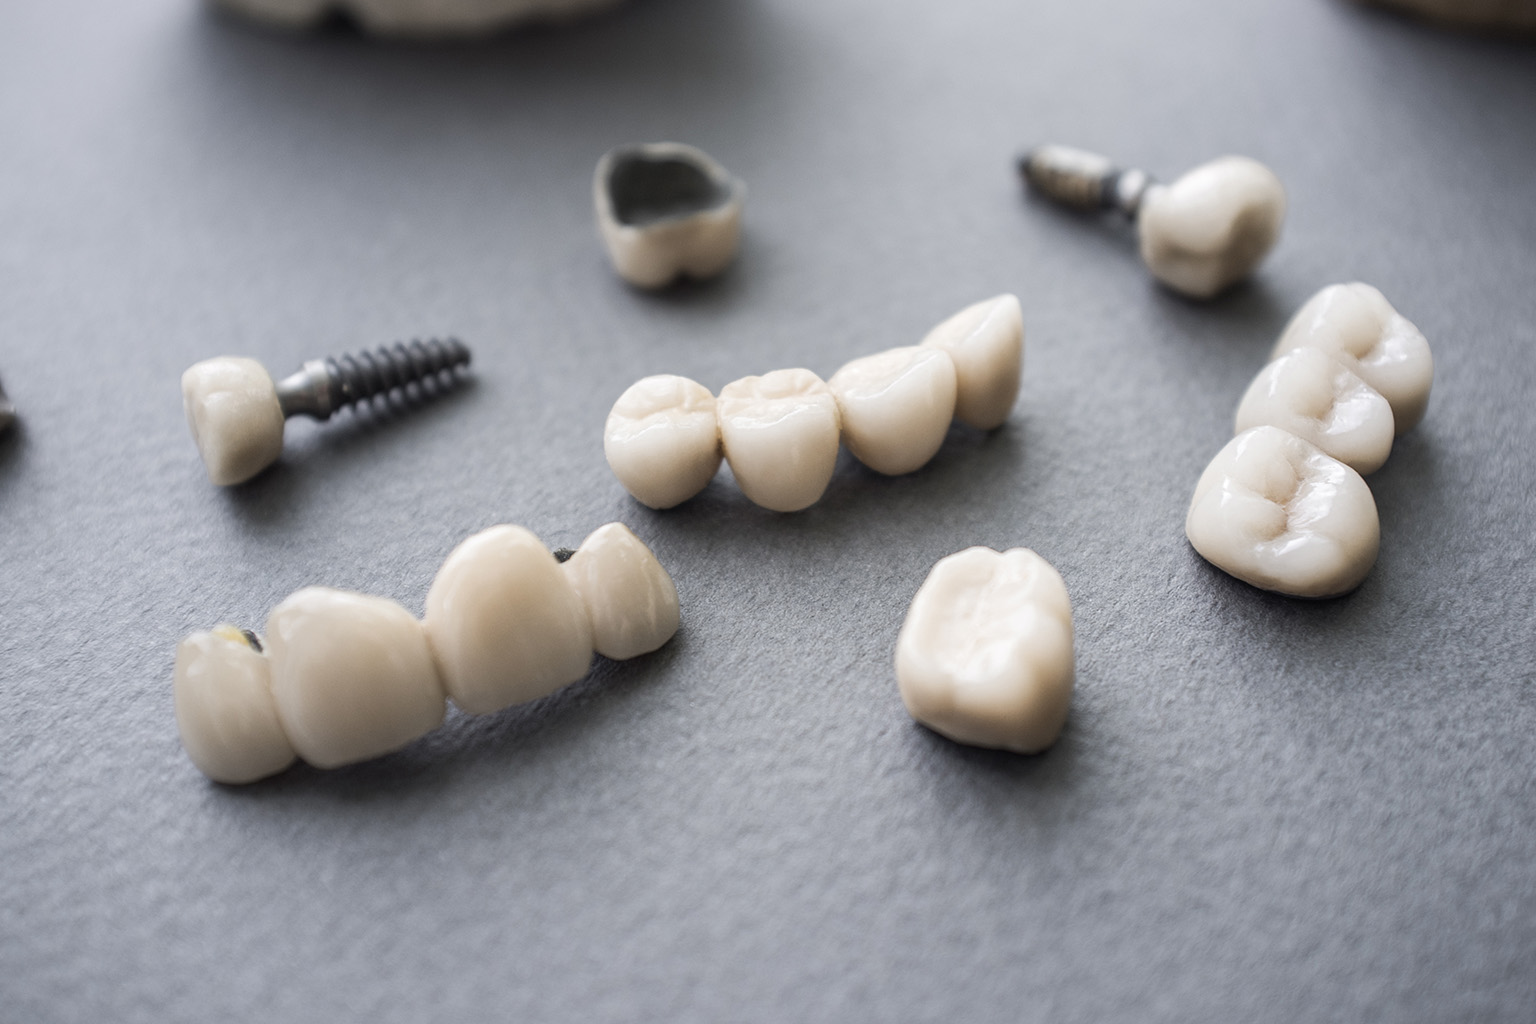 assortment of implants, crowns, and bridges on surface